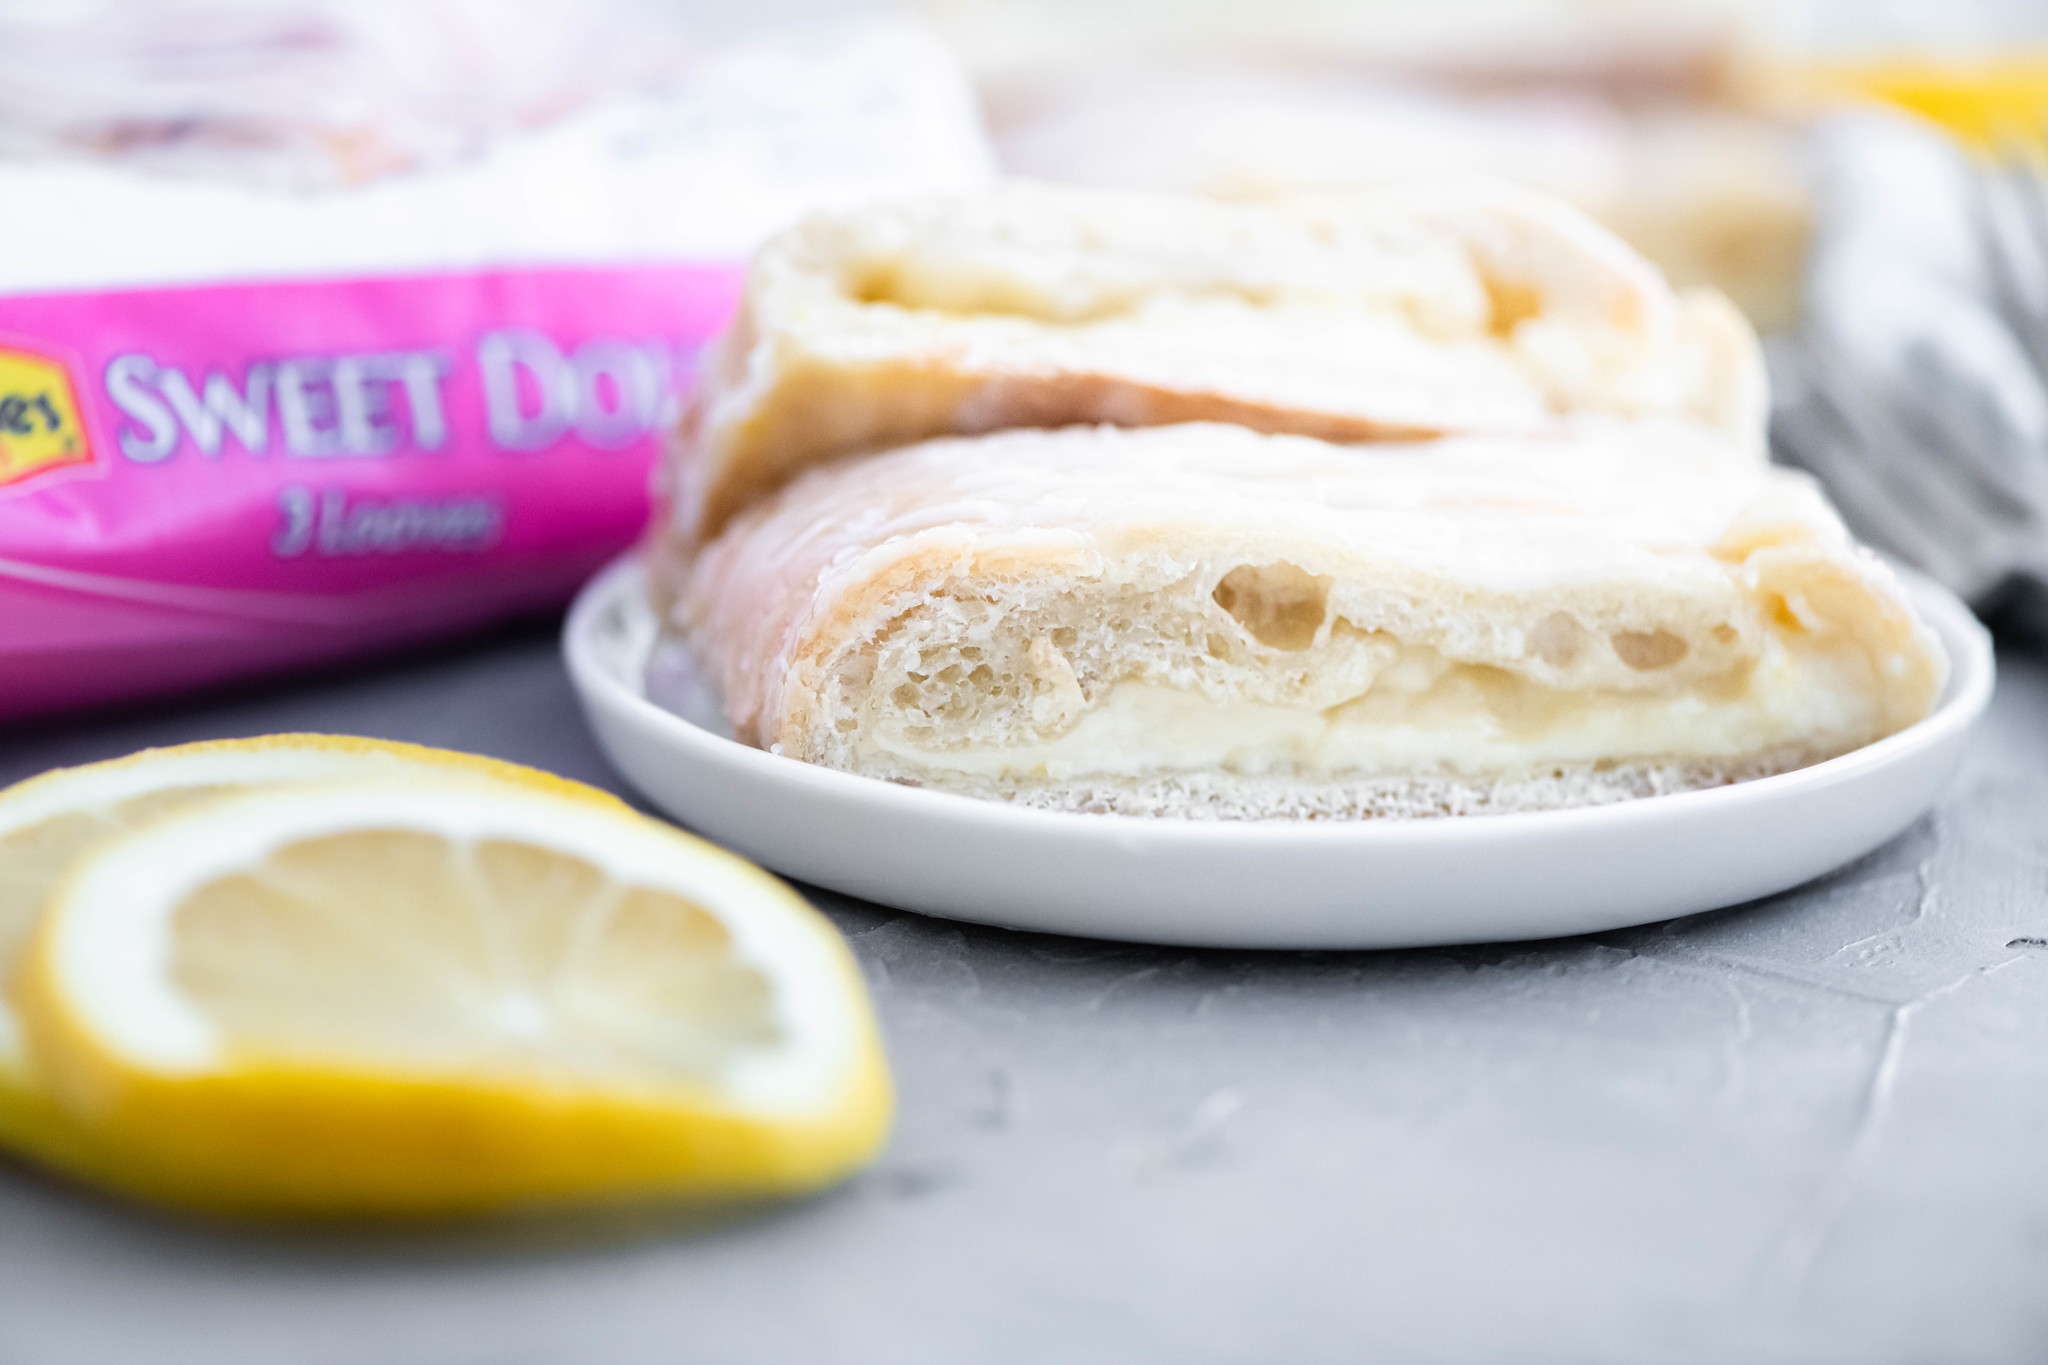 This Lemon Cream Cheese Braid is Easter brunch perfection. Start with Rhodes sweet dough and a few simple ingredients to make this holiday stunner.